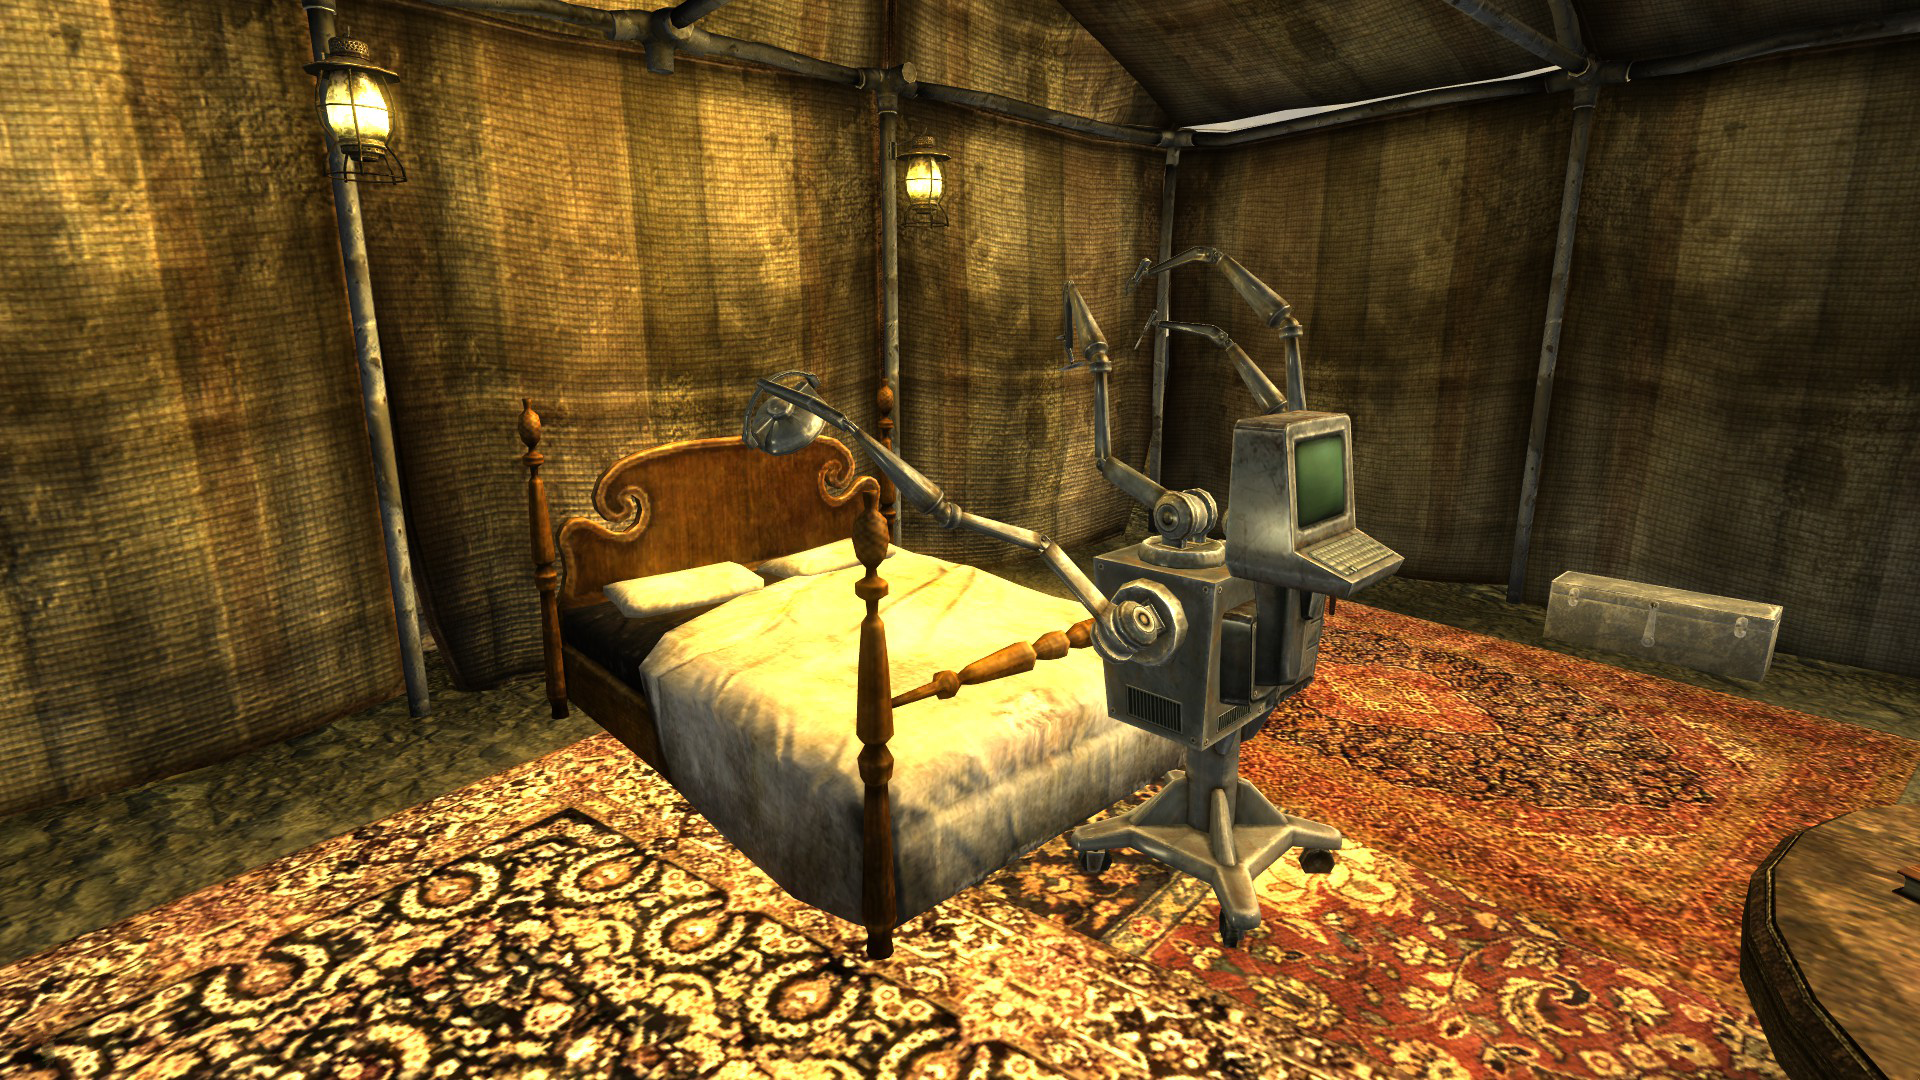 Gallery of Fallout 76 Vault Tec Bed.